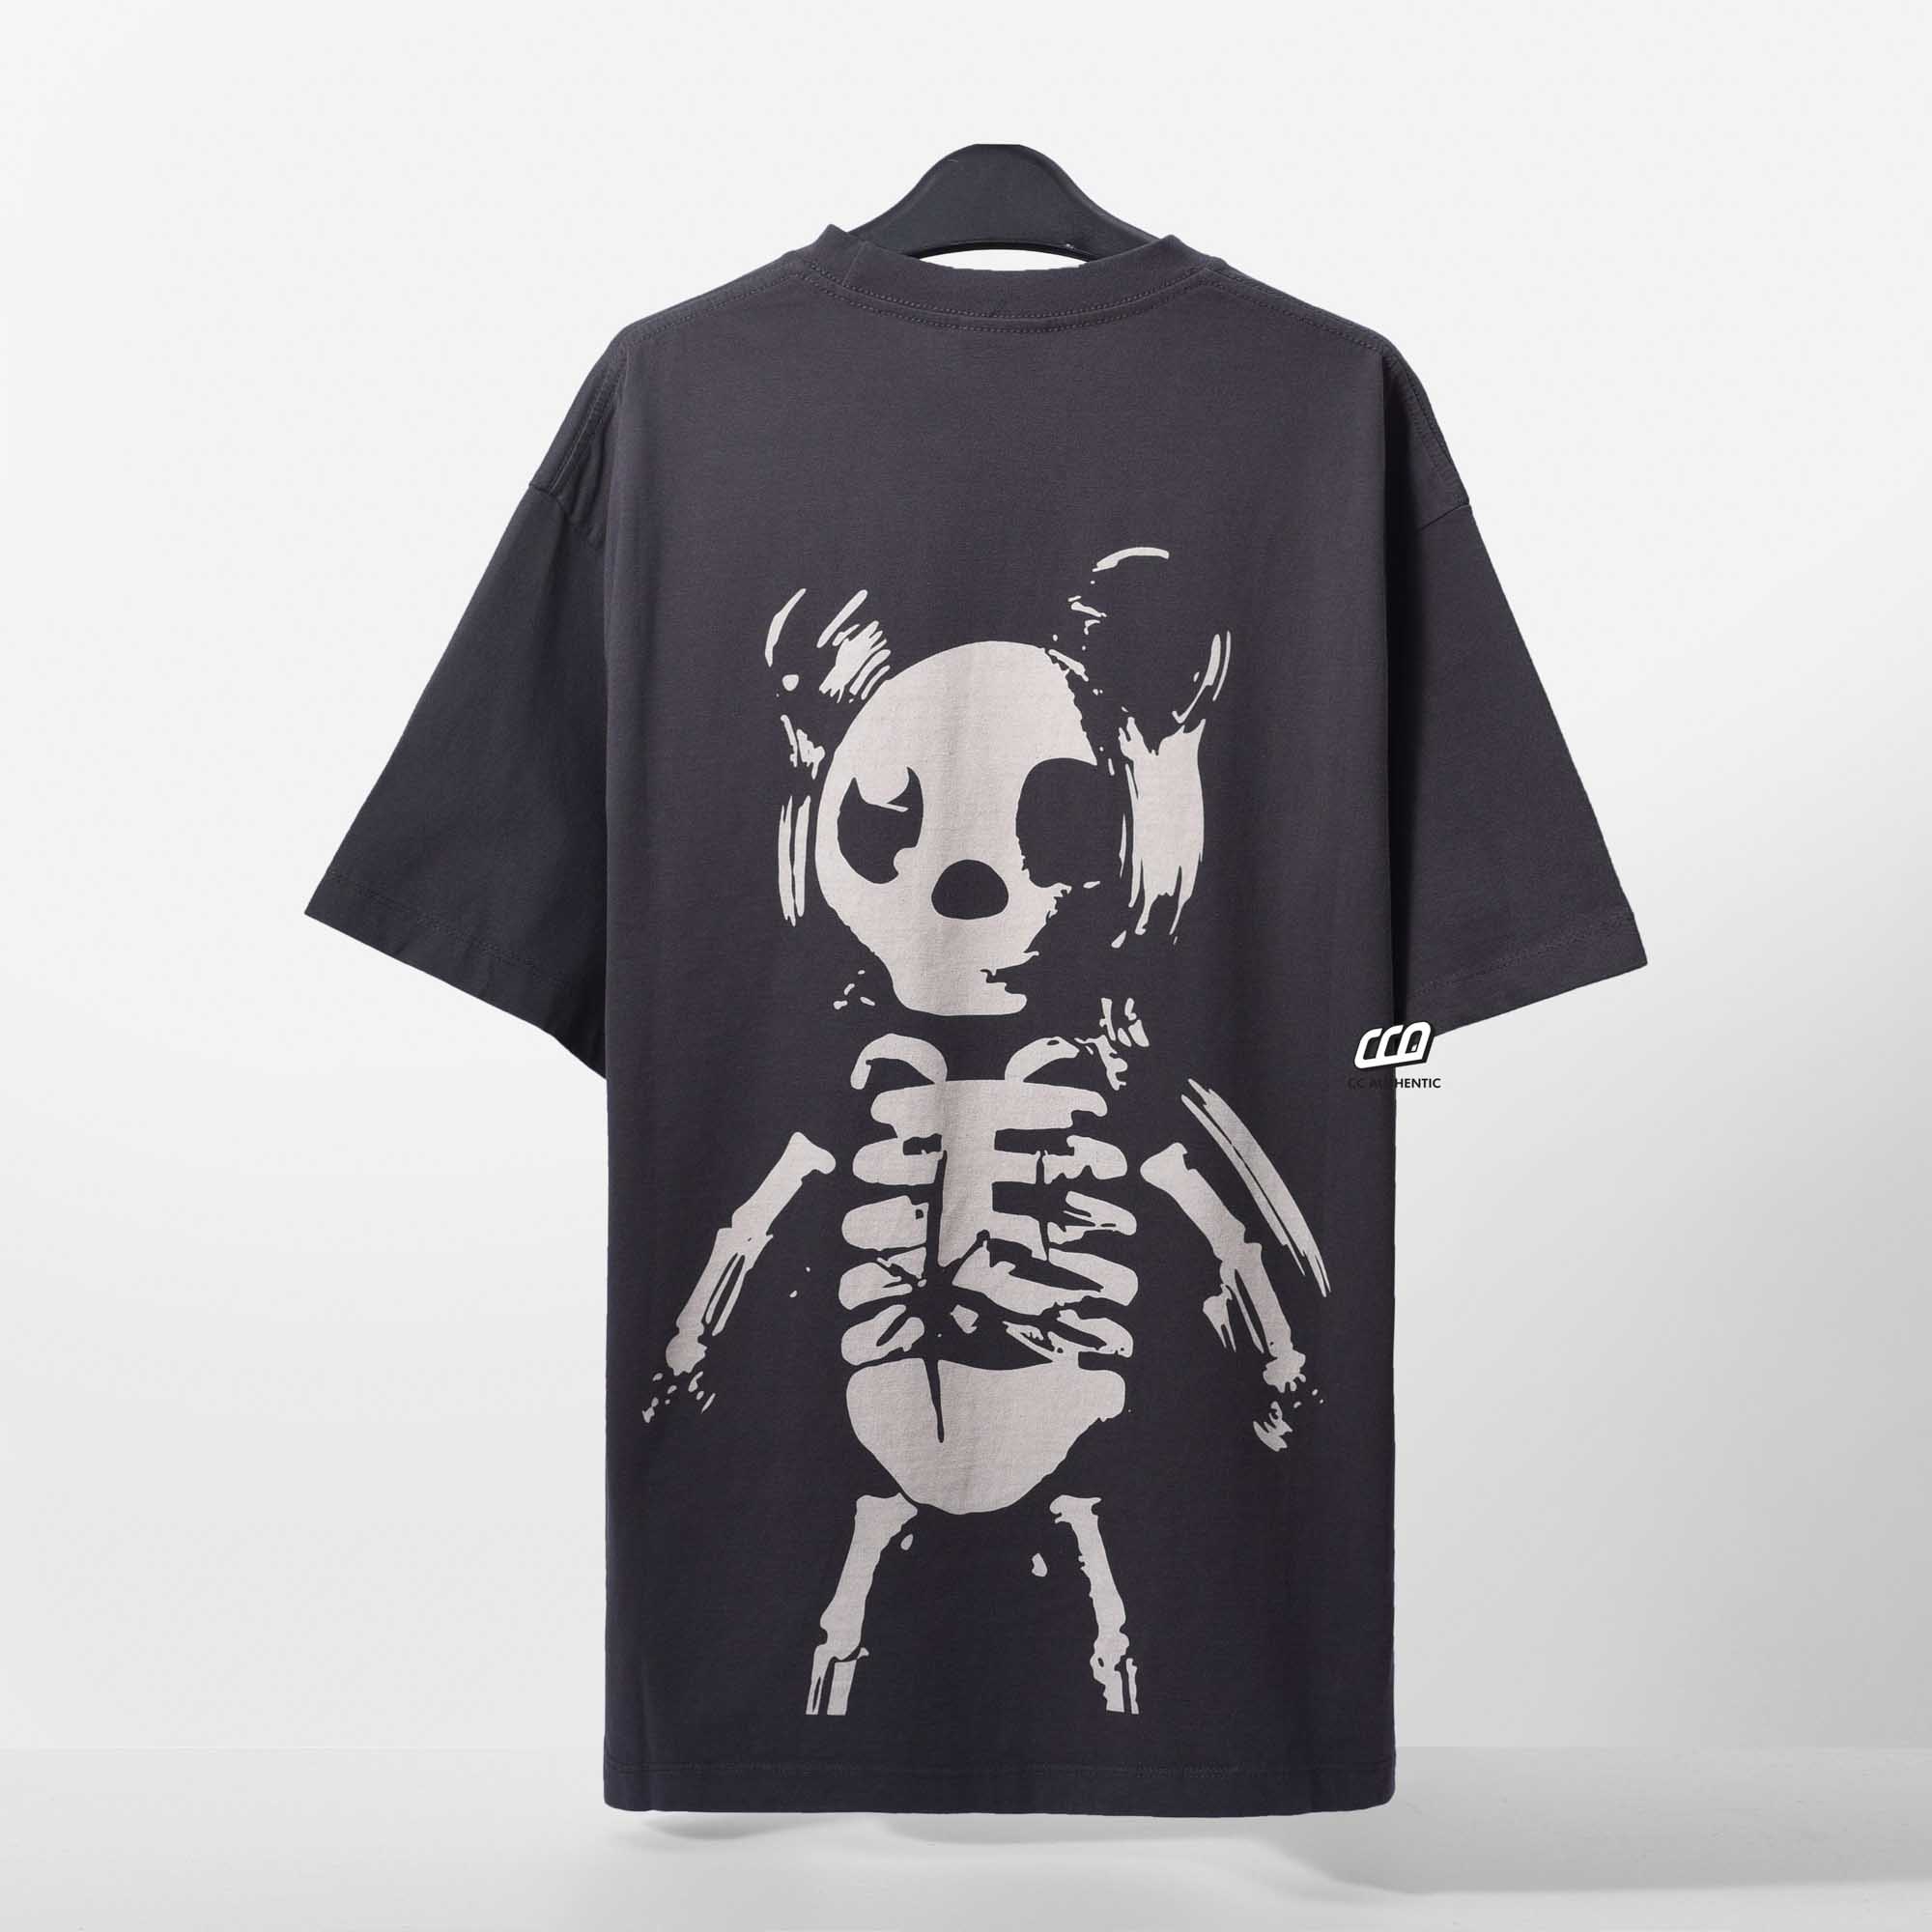 ADLV CREATURE T-SHIRT - CHARCOAL